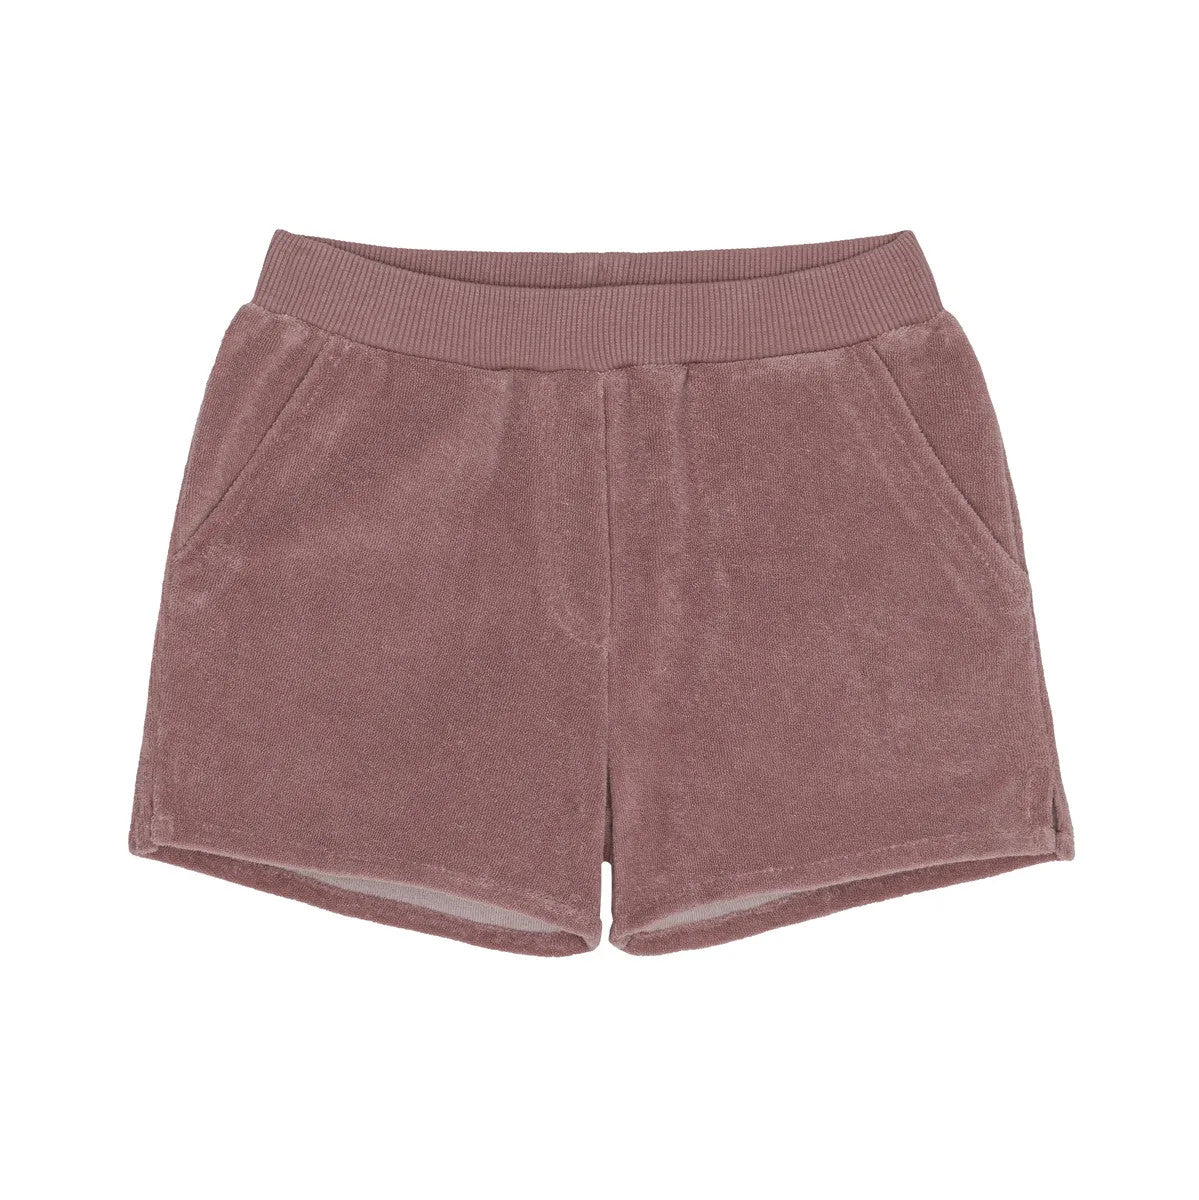 Little Hedonist organic cotton shorts with side pockets and splits for boys and girls in thick Whitered Rose